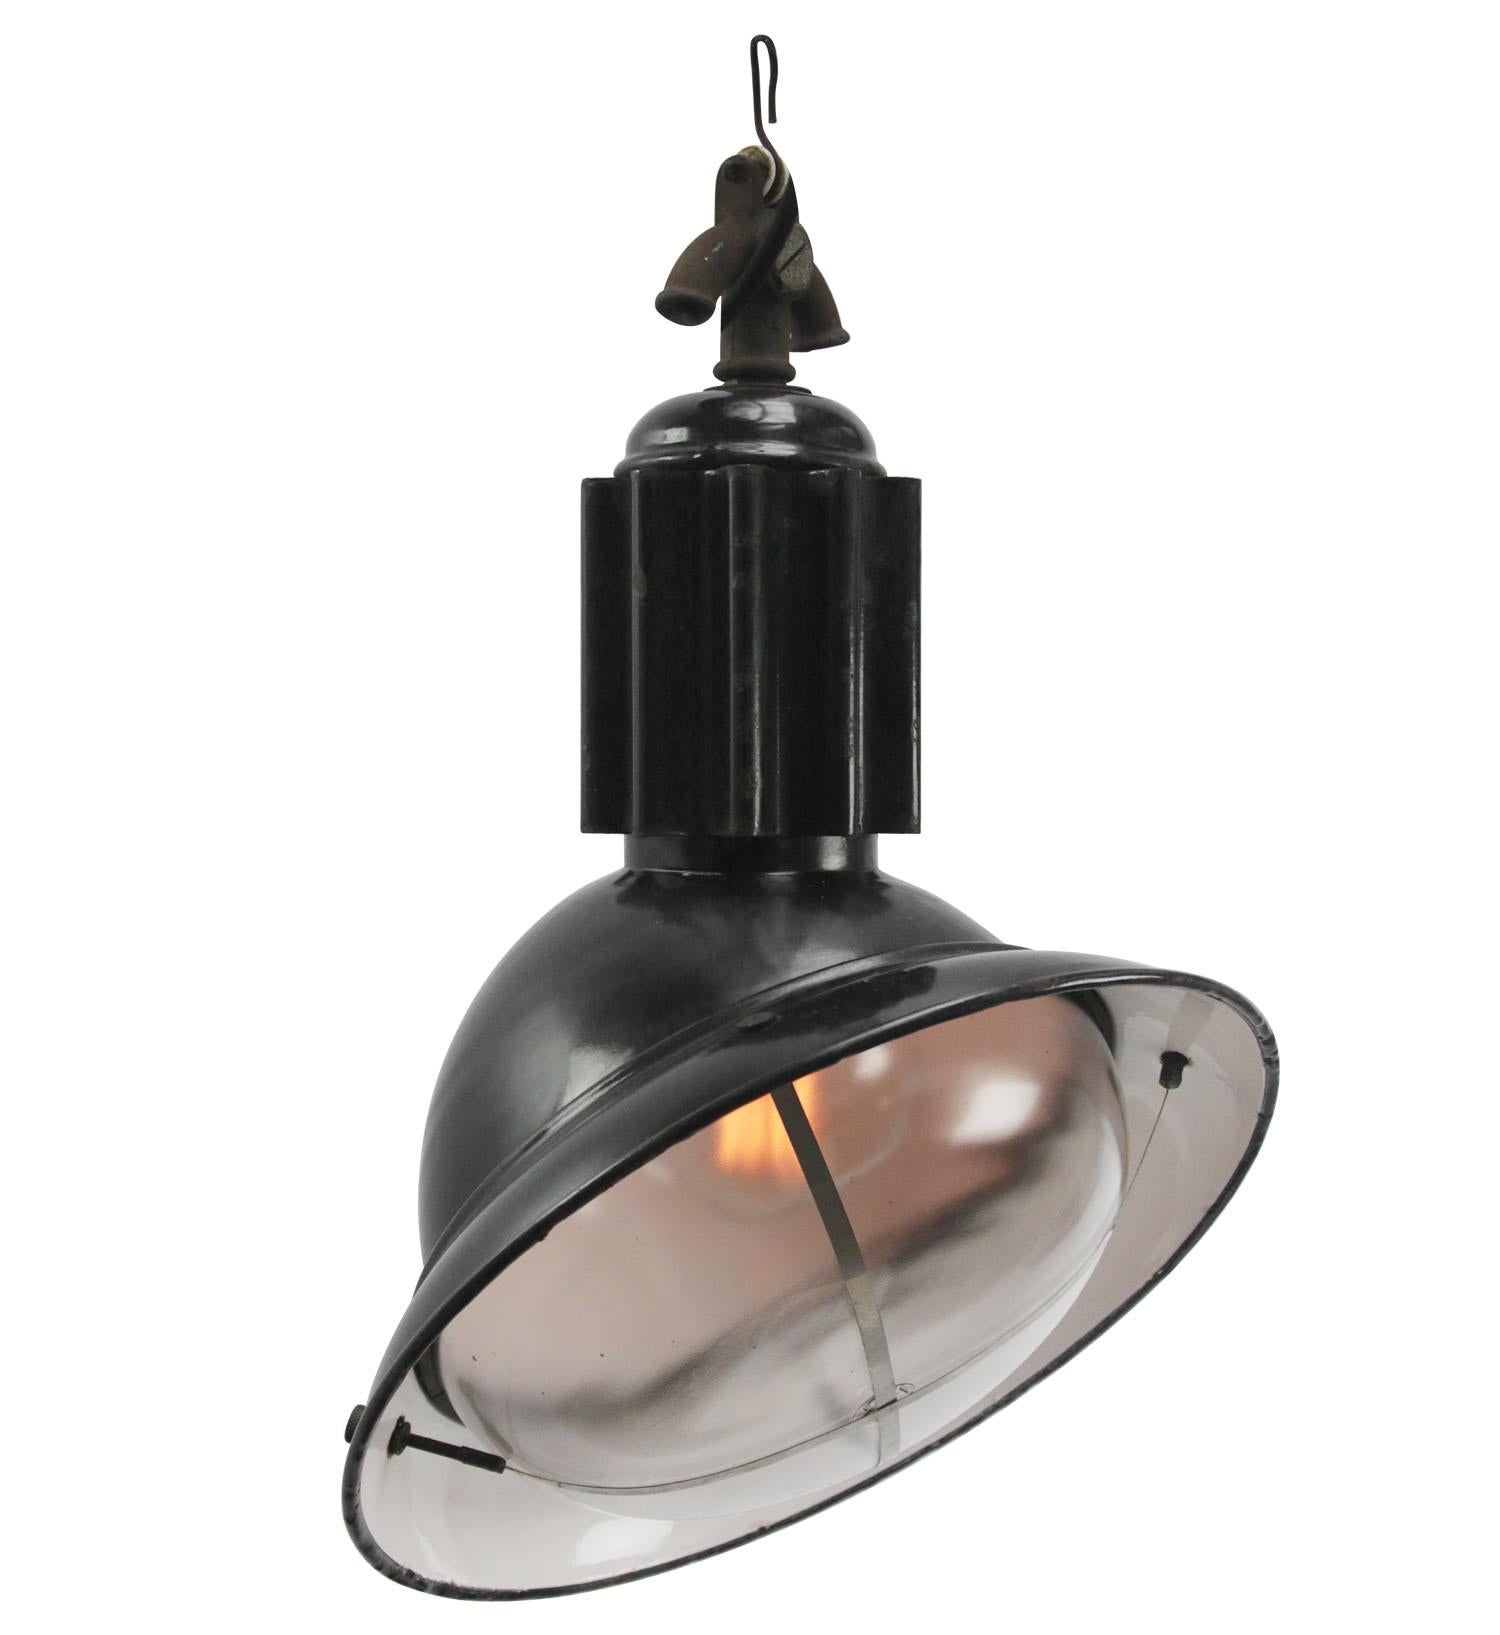 French asymmetrical black industrial lamp with round clear glass.
Black enamel. Rare model.

Weight: 4.10 kg / 9 lb

Priced per individual item. All lamps have been made suitable by international standards for incandescent light bulbs,